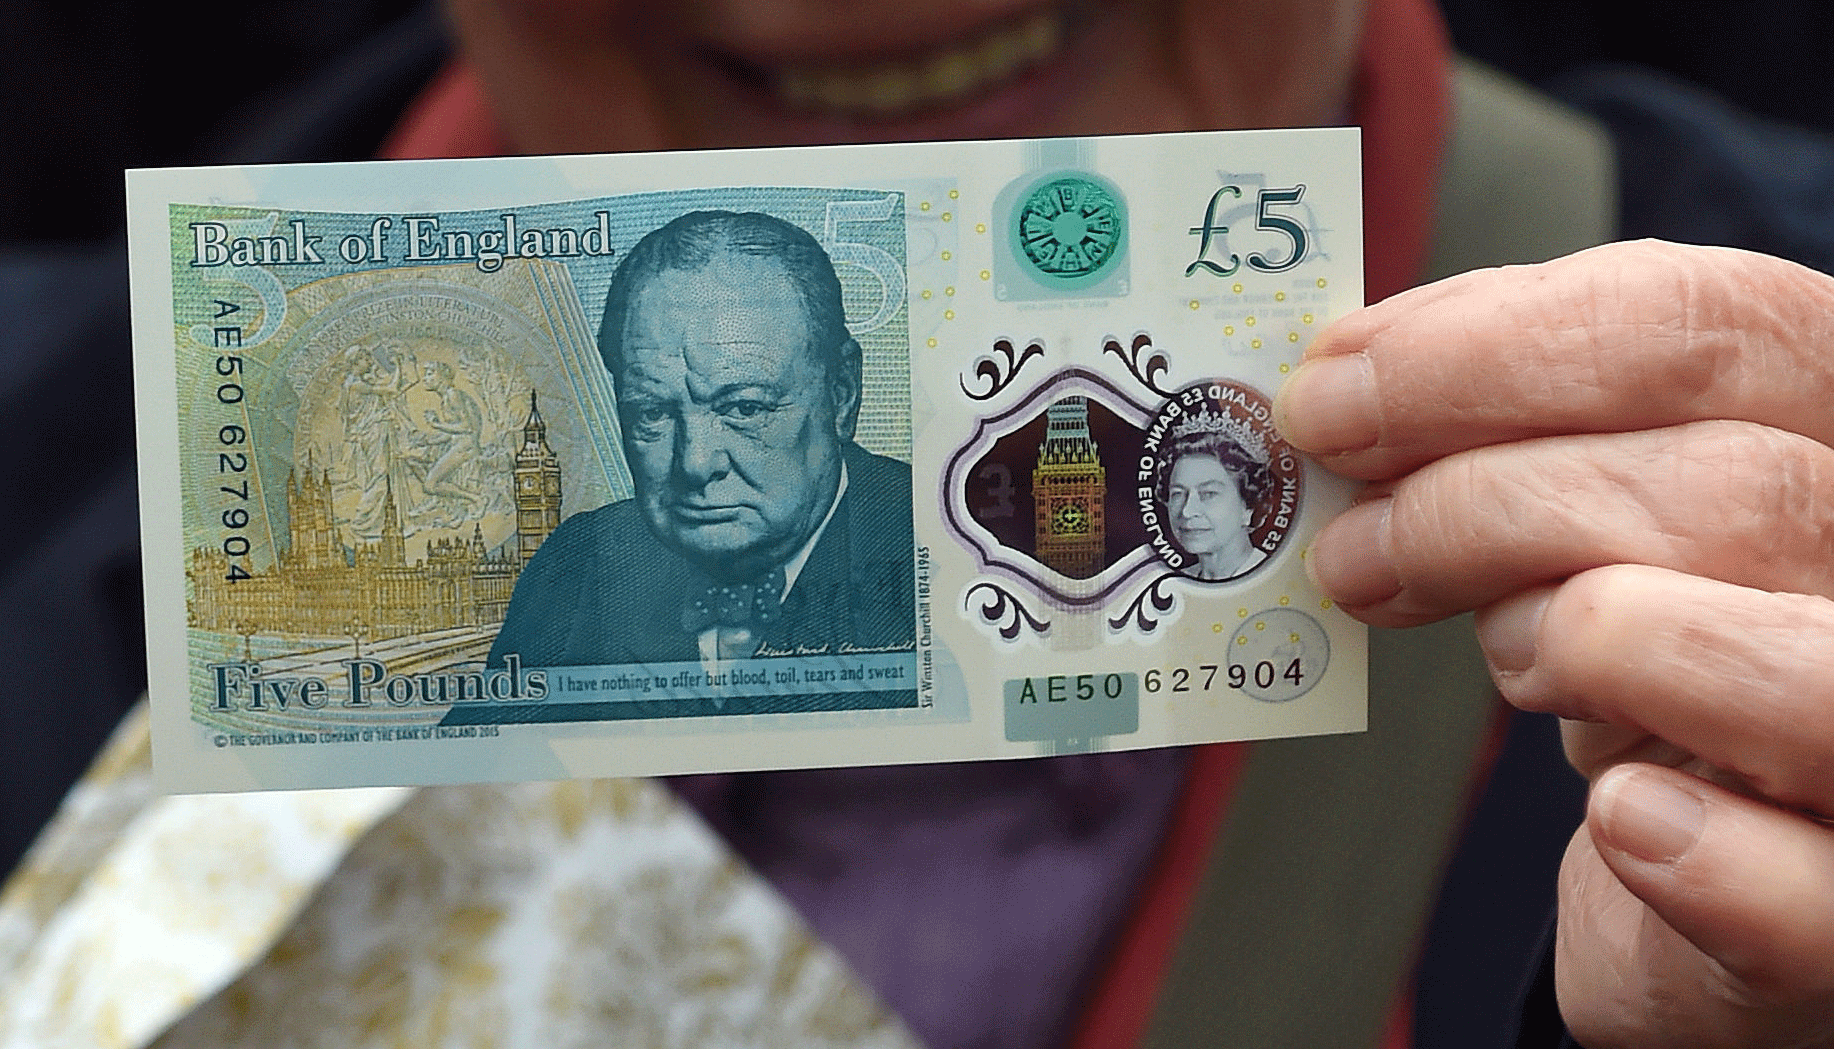 People are being ‘Winstoned’ by new £5 notes after snorting cocaine